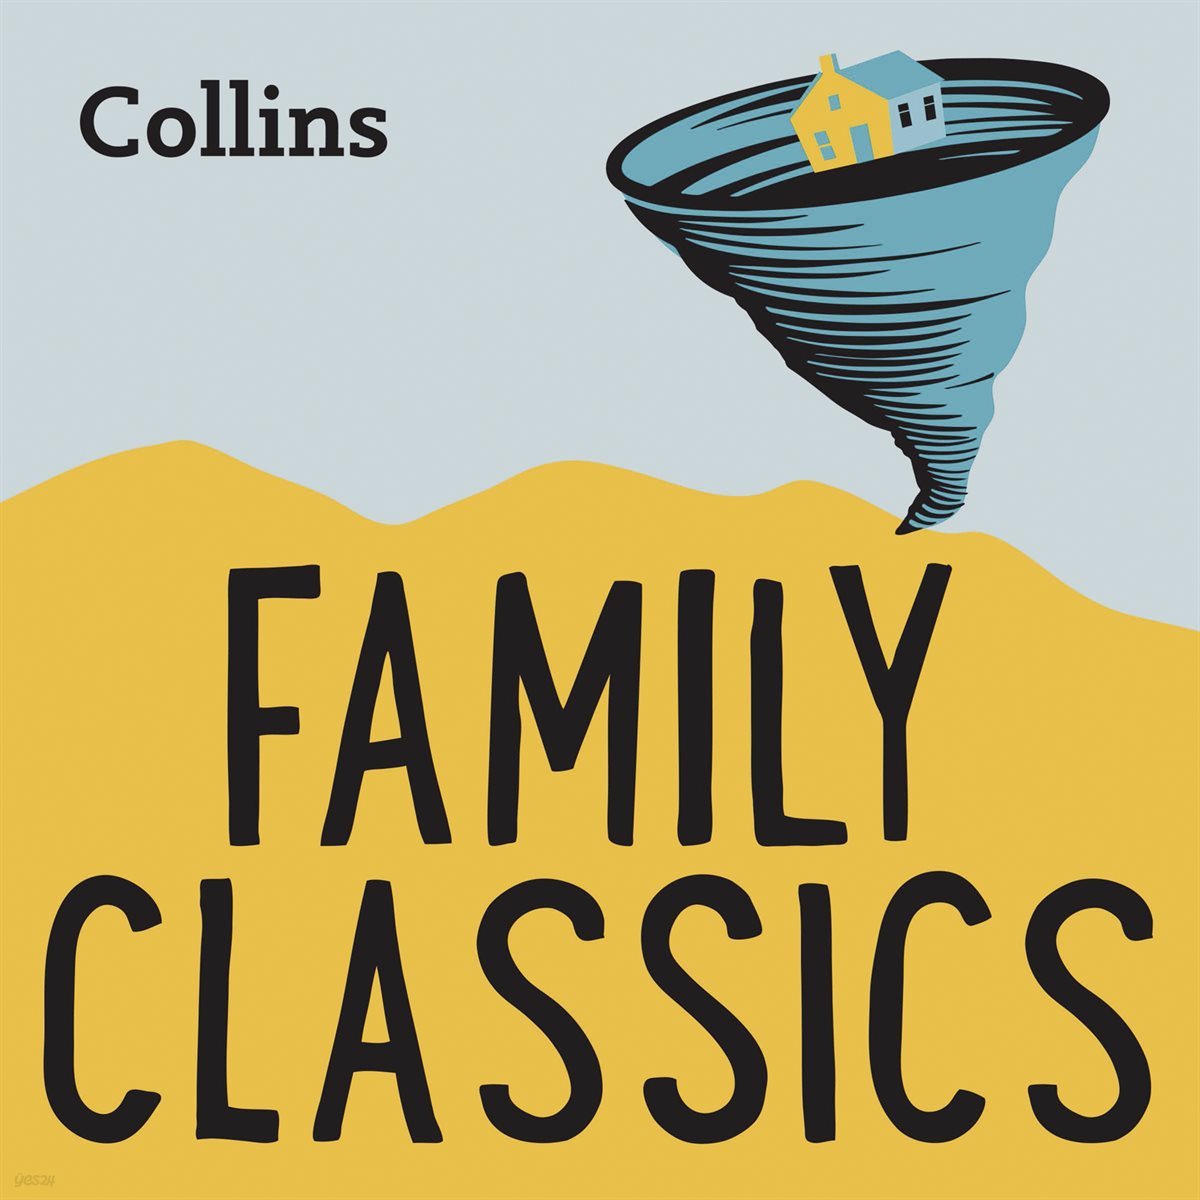 [US Eng] FAMILY CLASSICS: For ages 7-11 -Collins